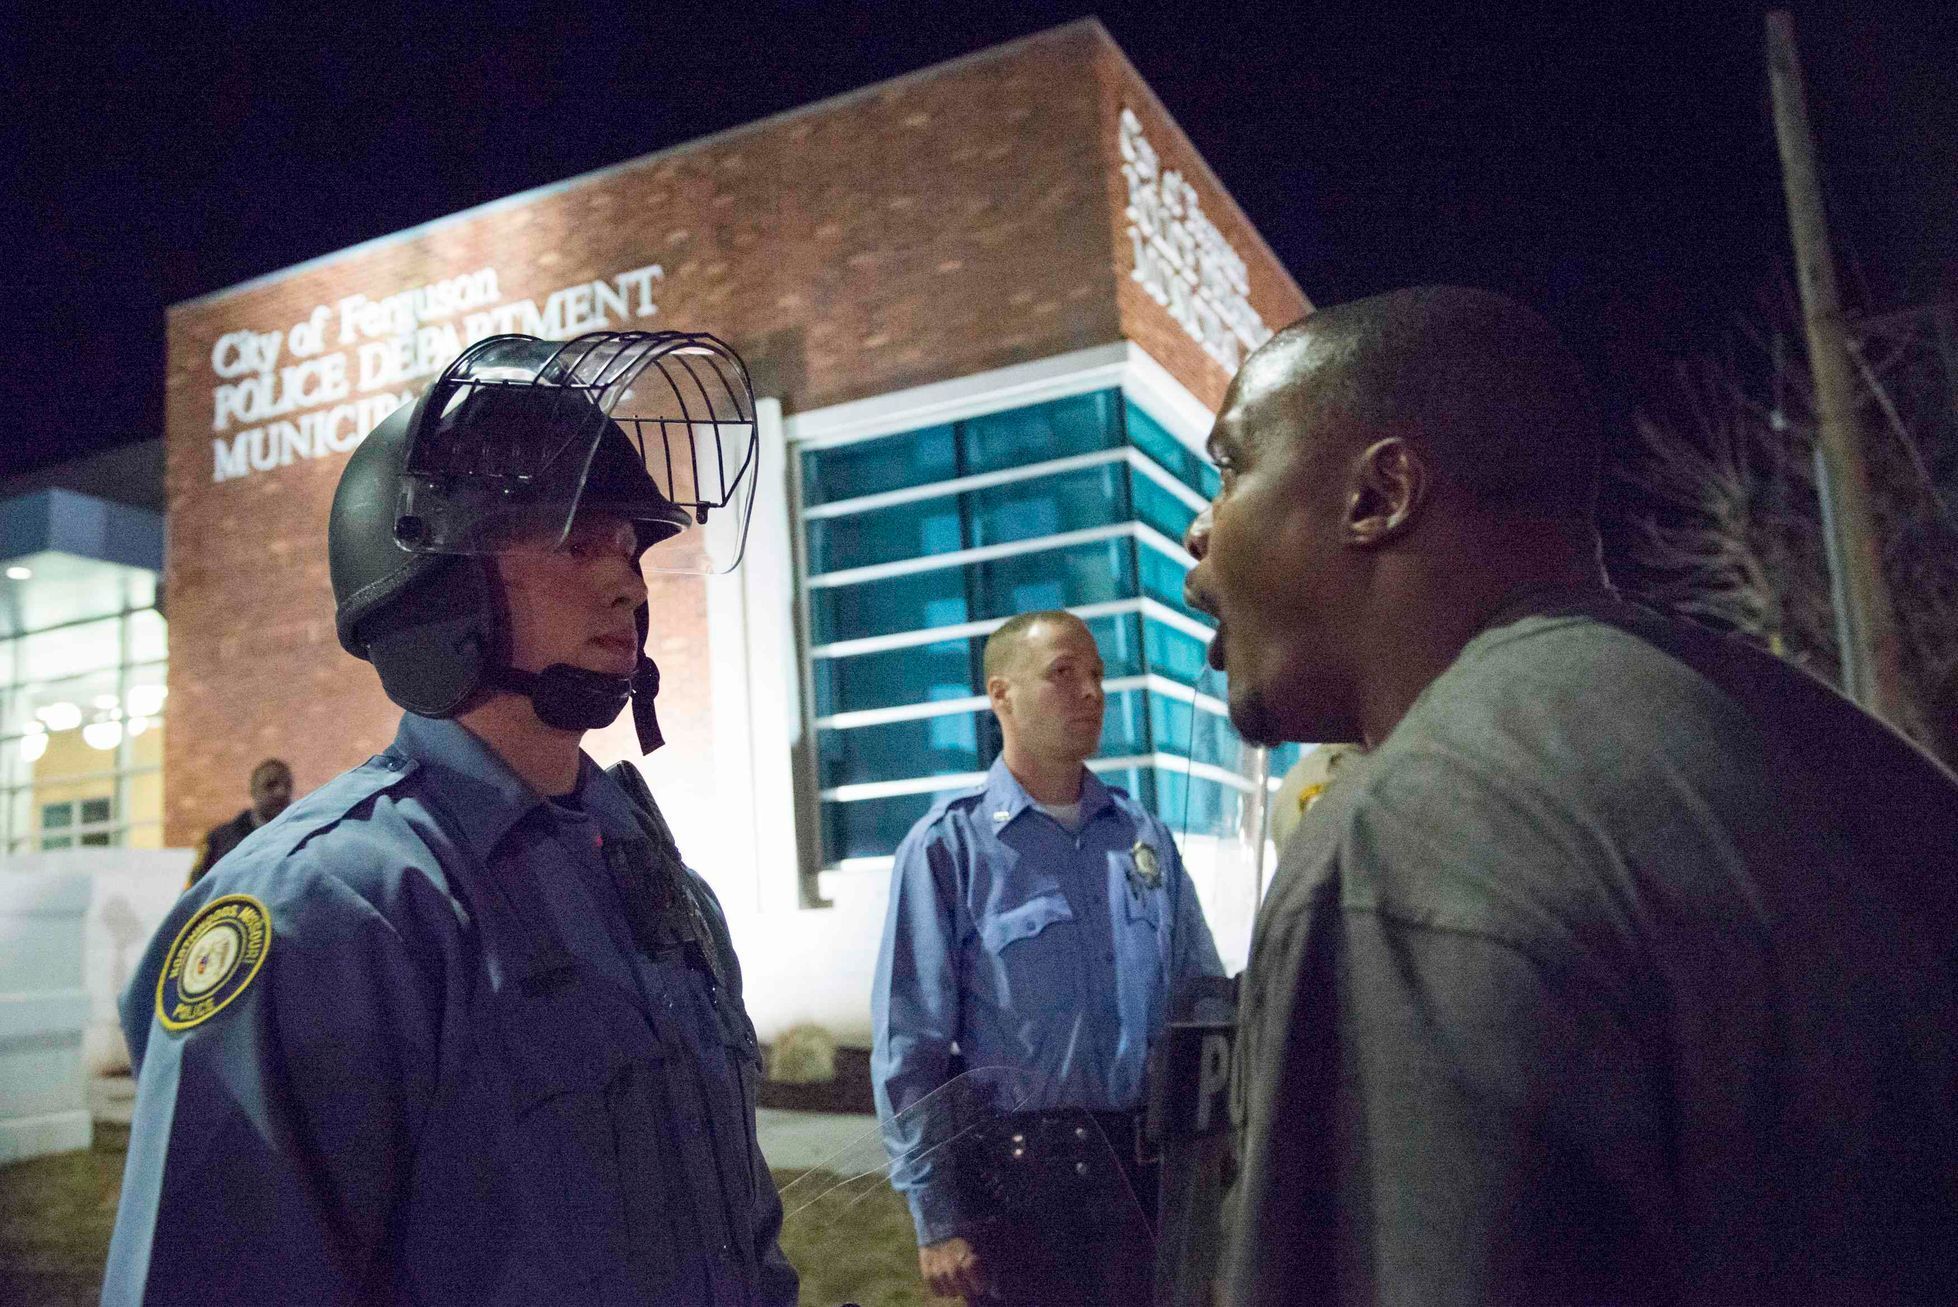 A protester confronts a police officer outside the City of Ferguson Police Department and Municipal Court in Ferguson